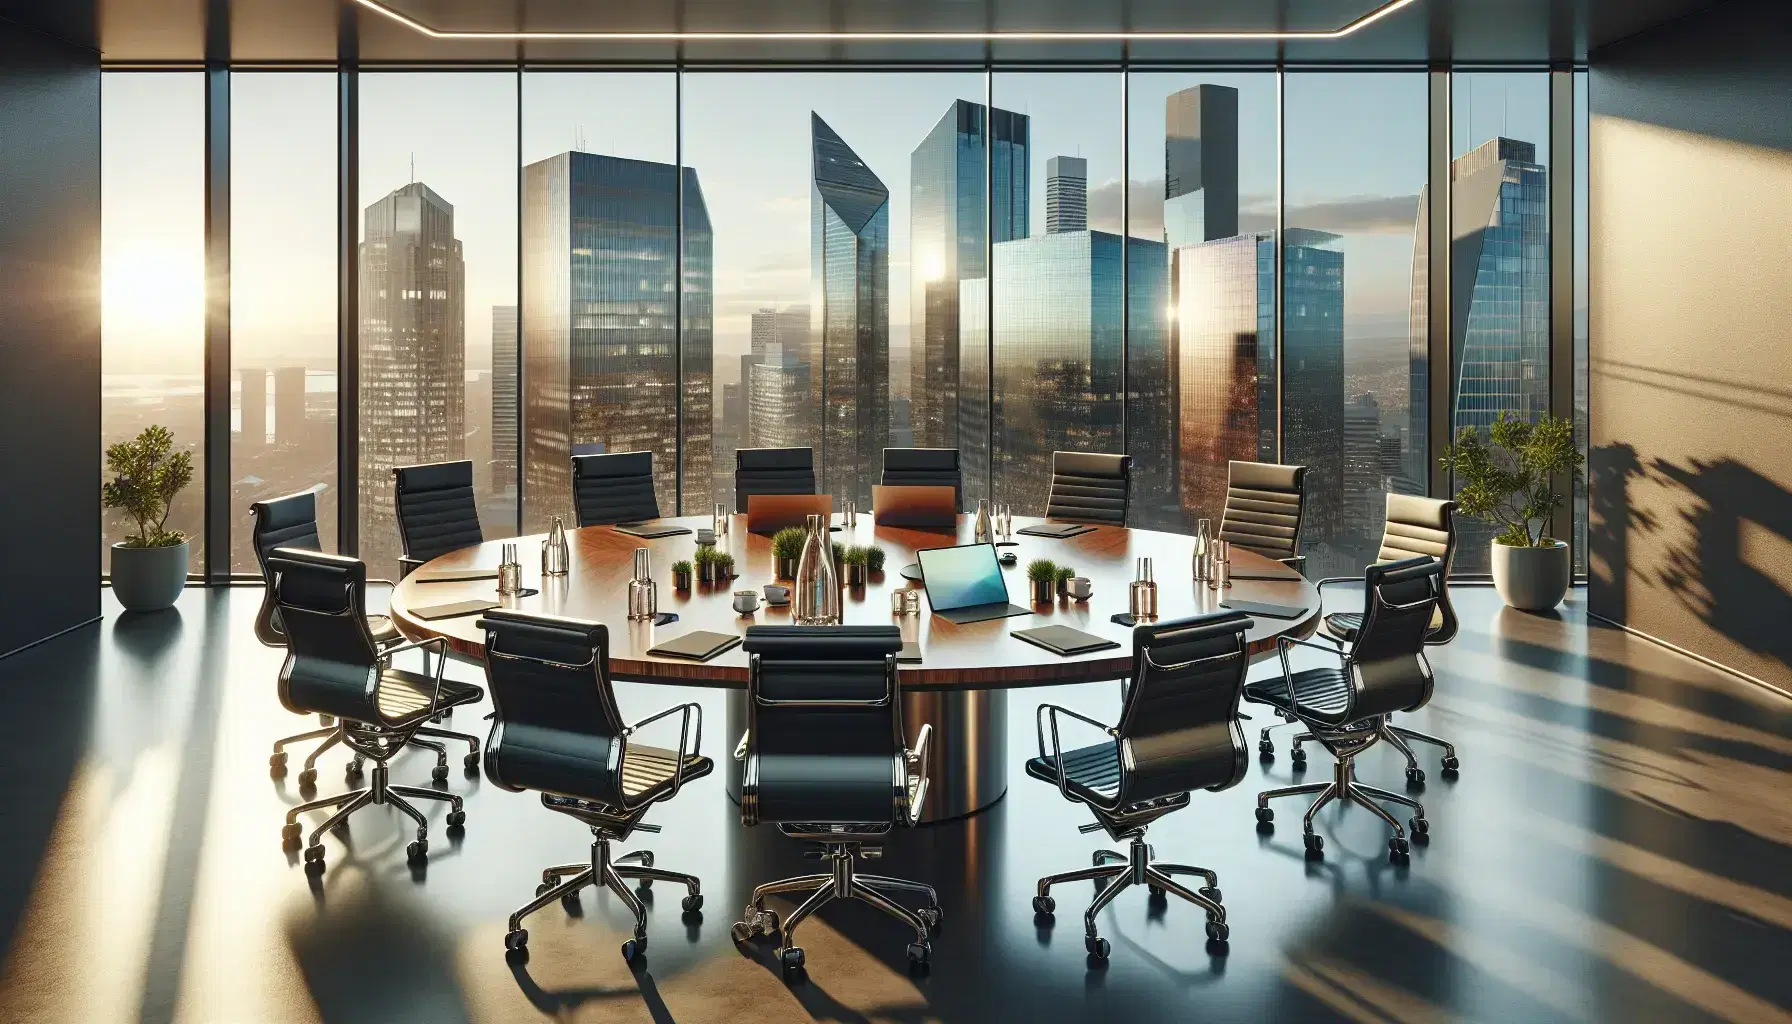 Modern boardroom with oval wooden table, black swivel chairs, tech devices, and a cityscape view through panoramic window at sunset.